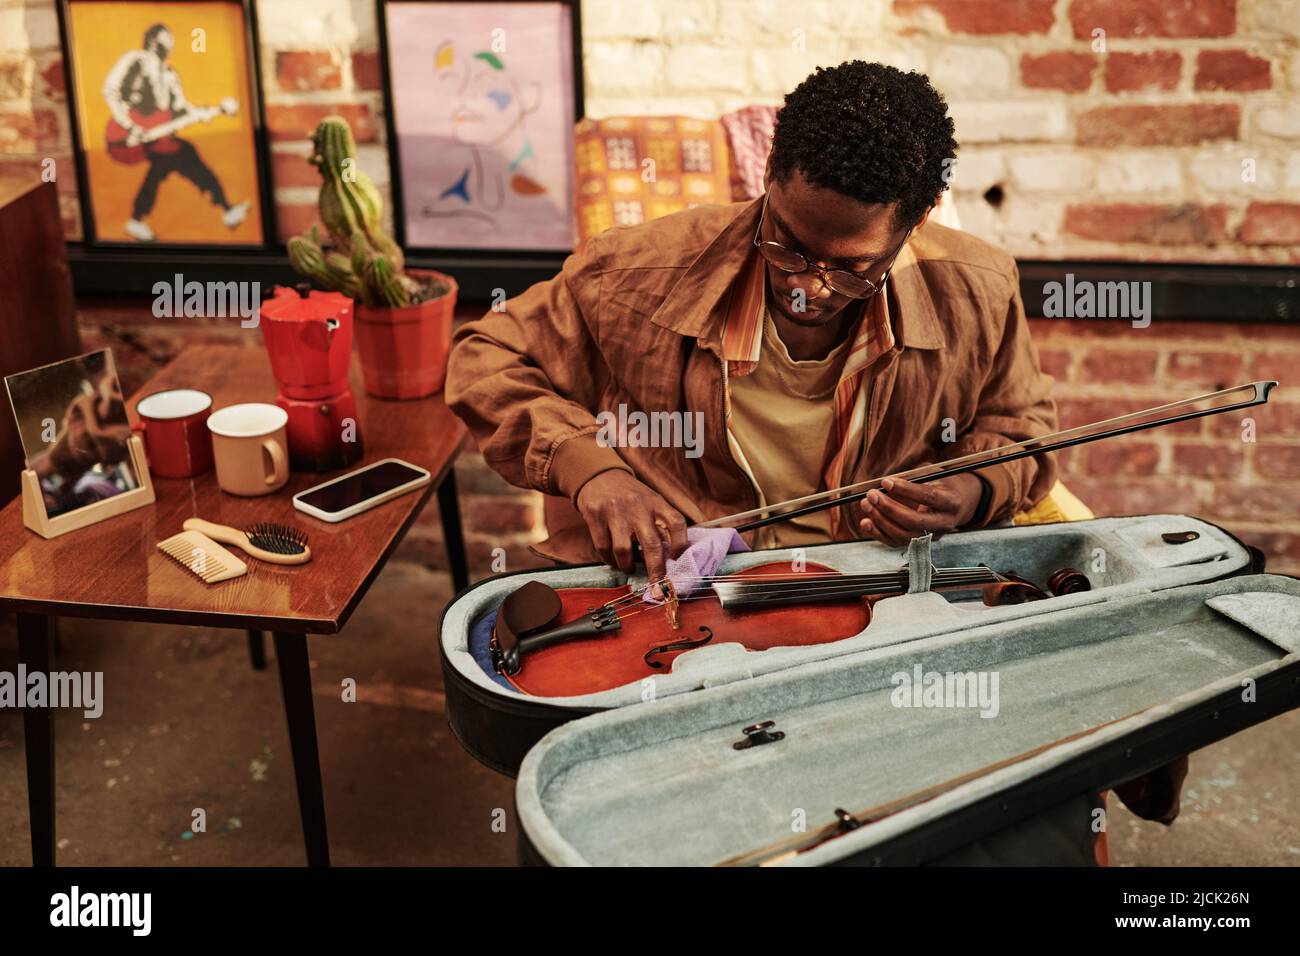 Young black man skilled in playing violin opening slipcover with musical instrument and taking it out while going to perform piece of music Stock Photo